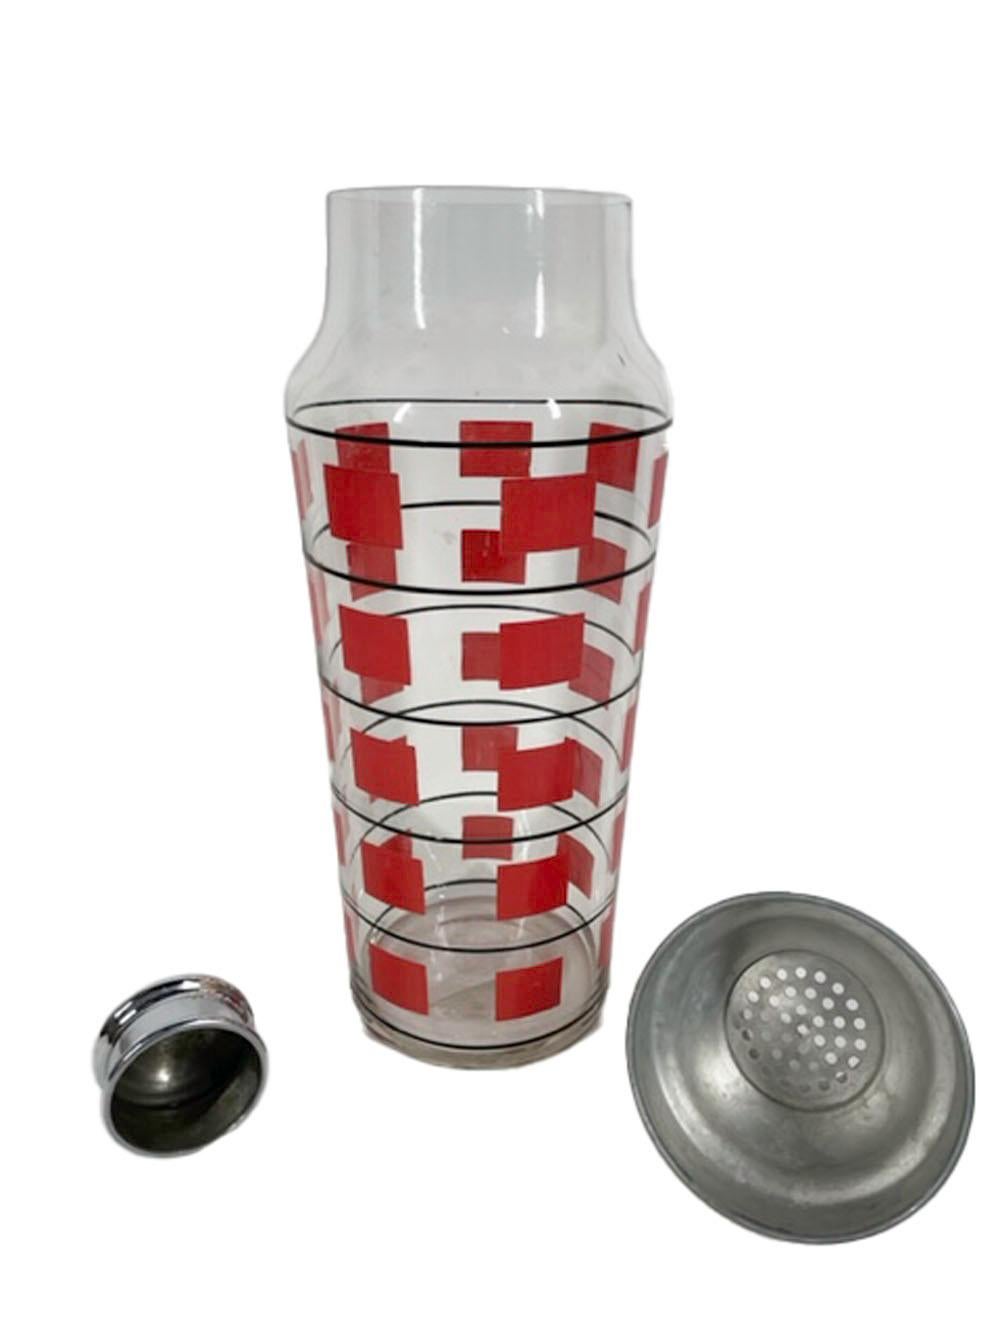 Art Deco Cocktail Shaker with Bands of Red Squares Between Black Lines In Good Condition For Sale In Nantucket, MA